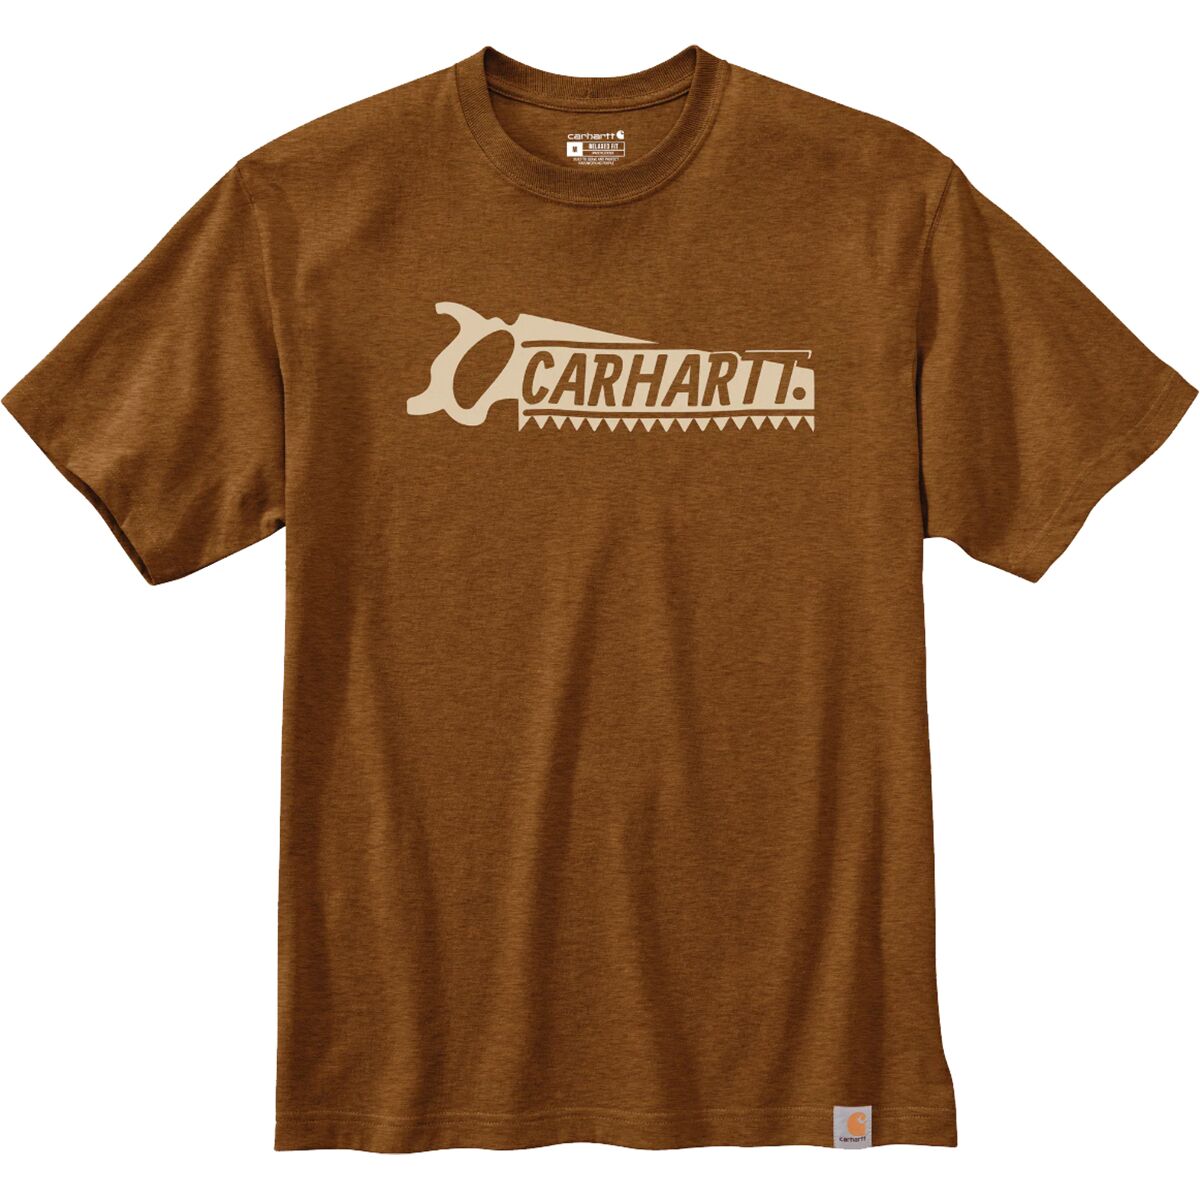 Carhartt Relaxed Fit HW Short-Sleeve Saw Graphic T-Shirt - Men's